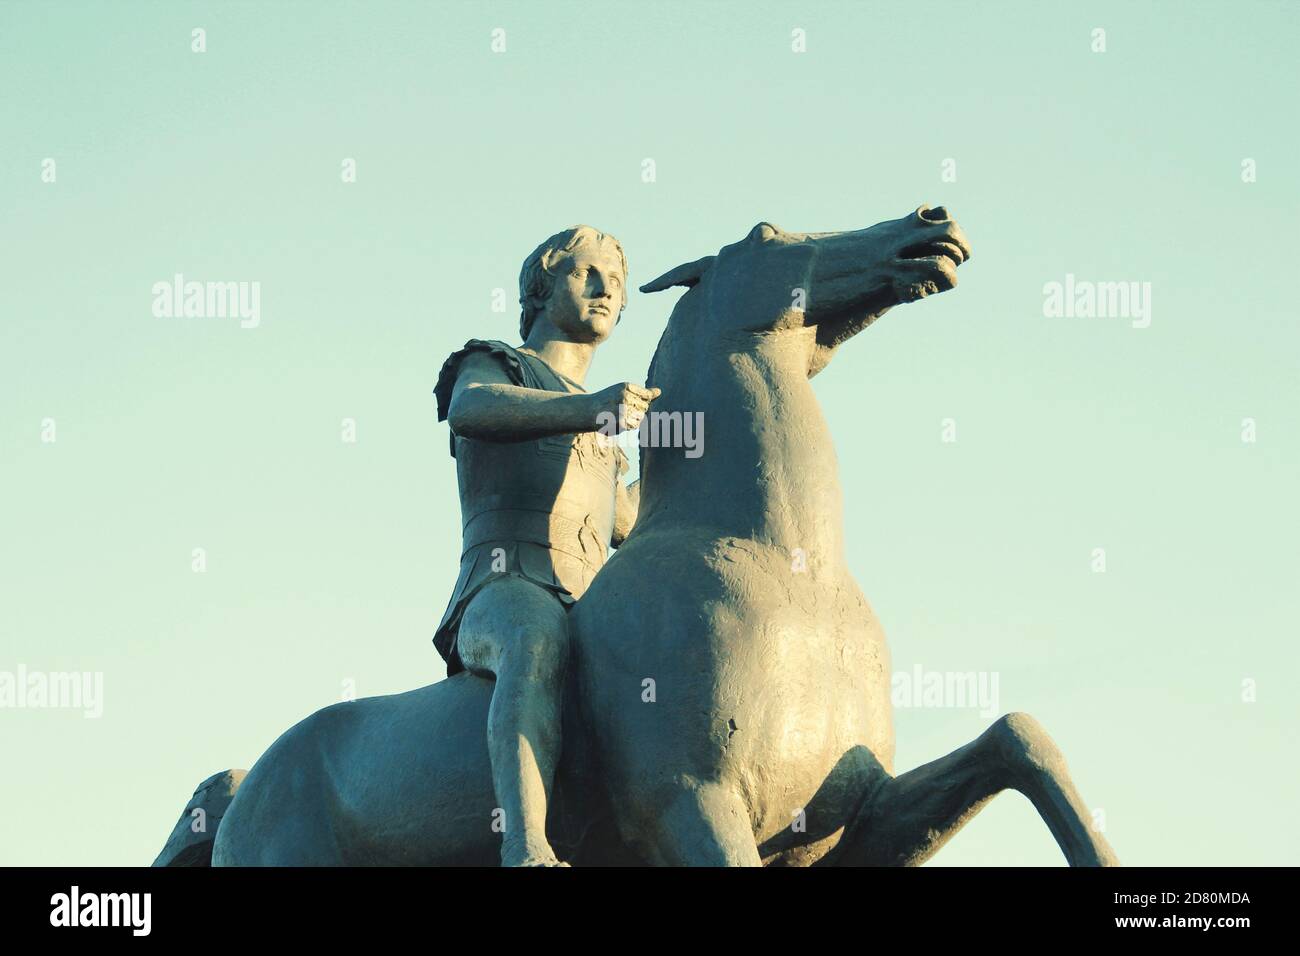 Statue of Alexander the Great in Athens, Greece, October 2 2019. Stock Photo